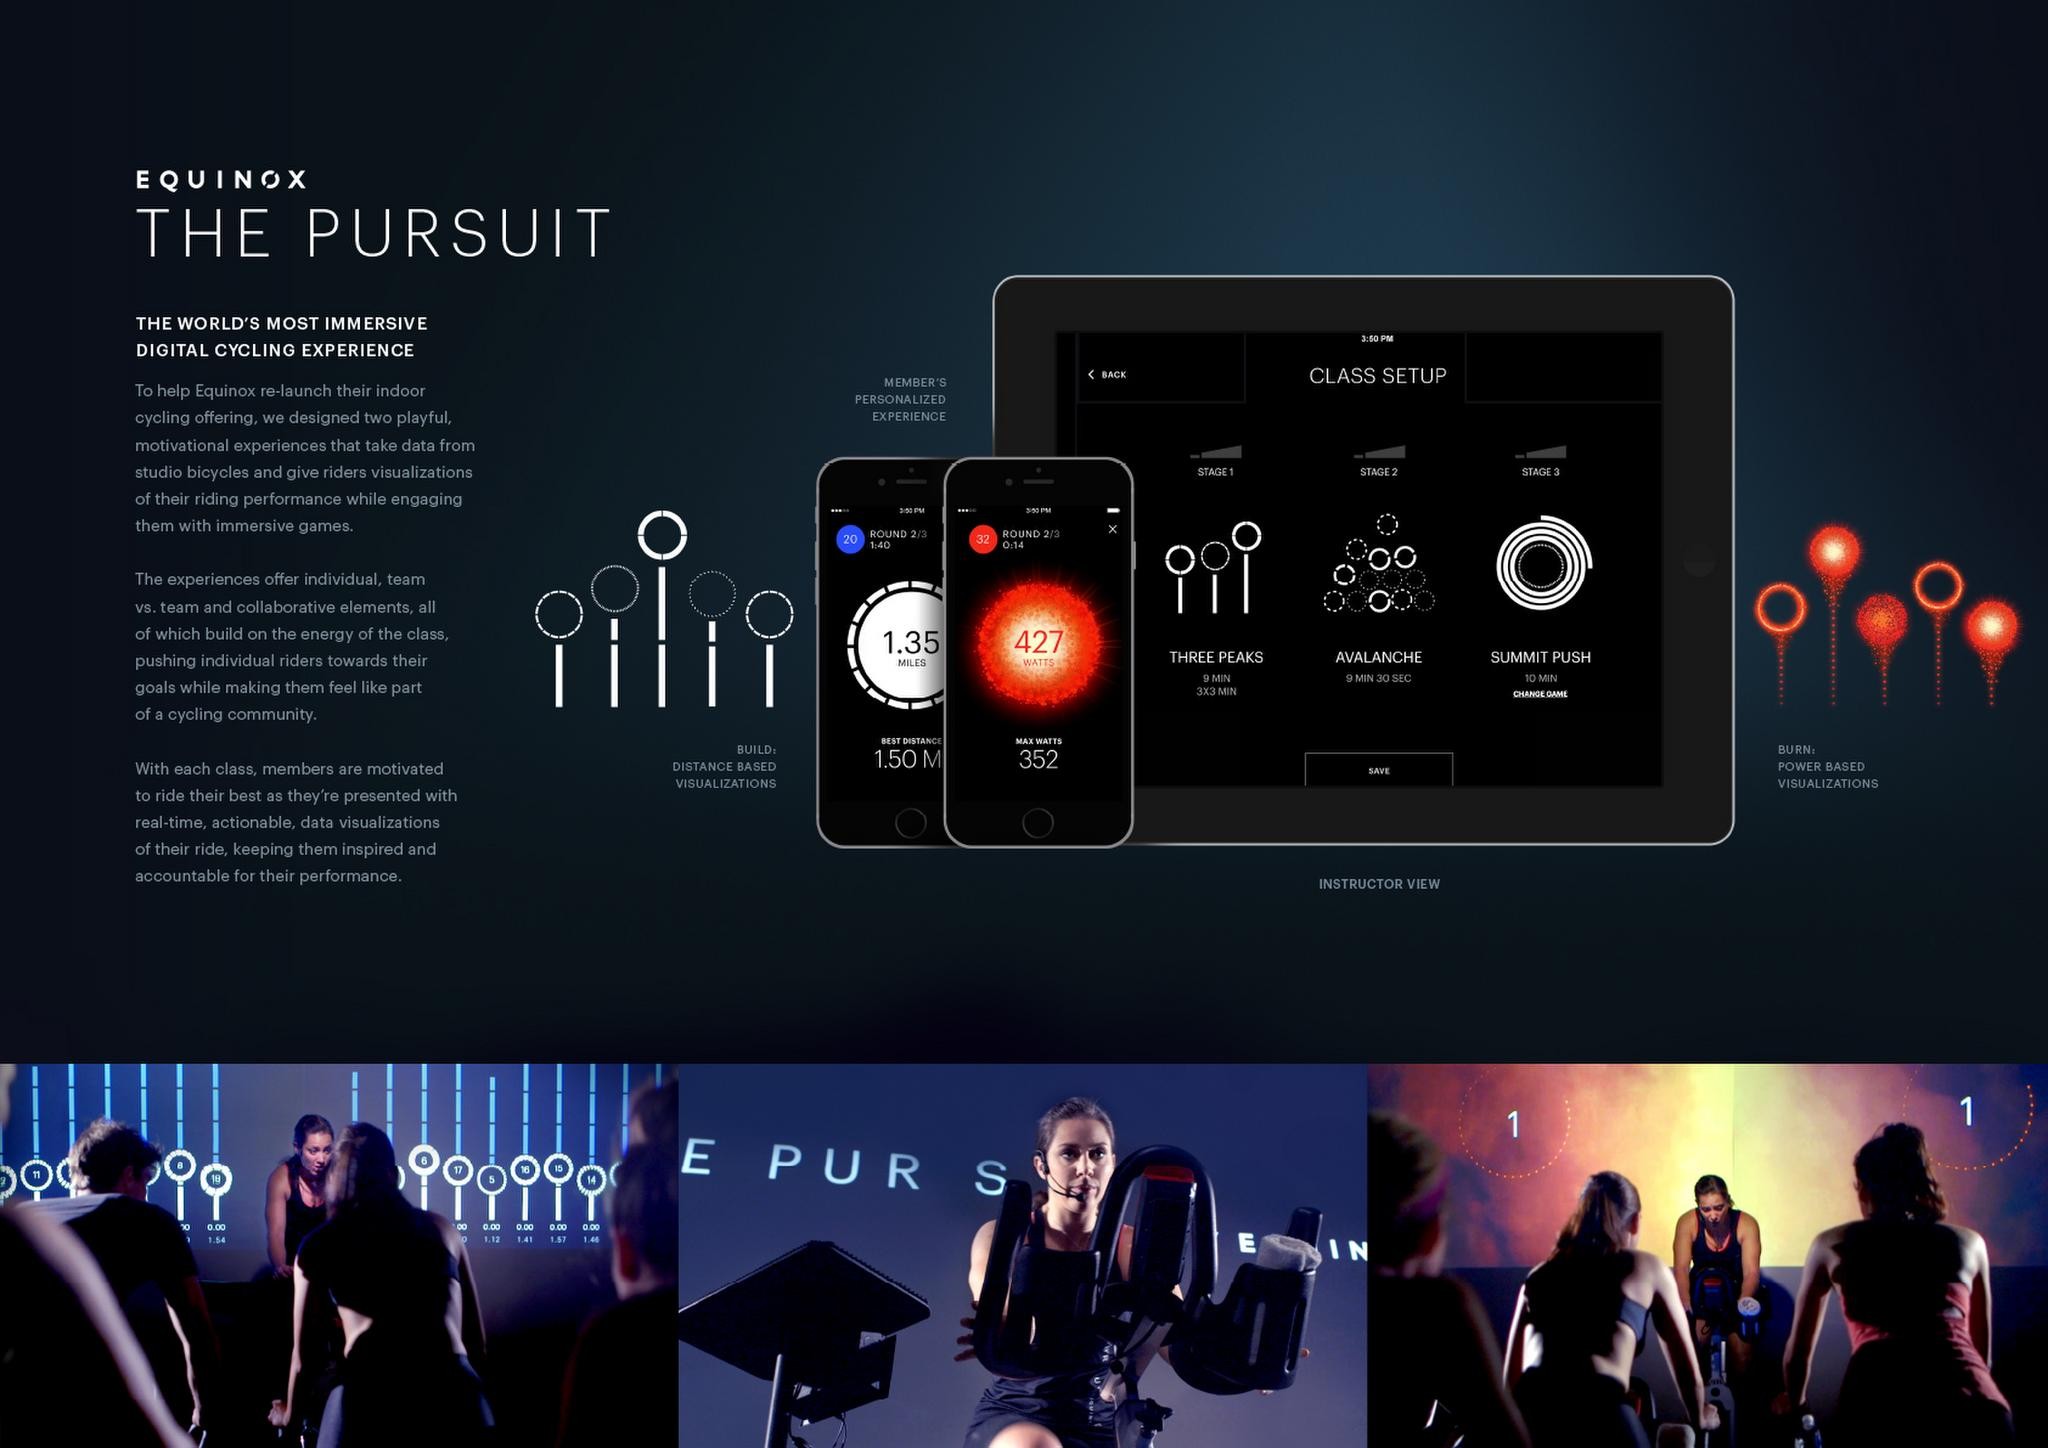 THE PURSUIT BY EQUINOX